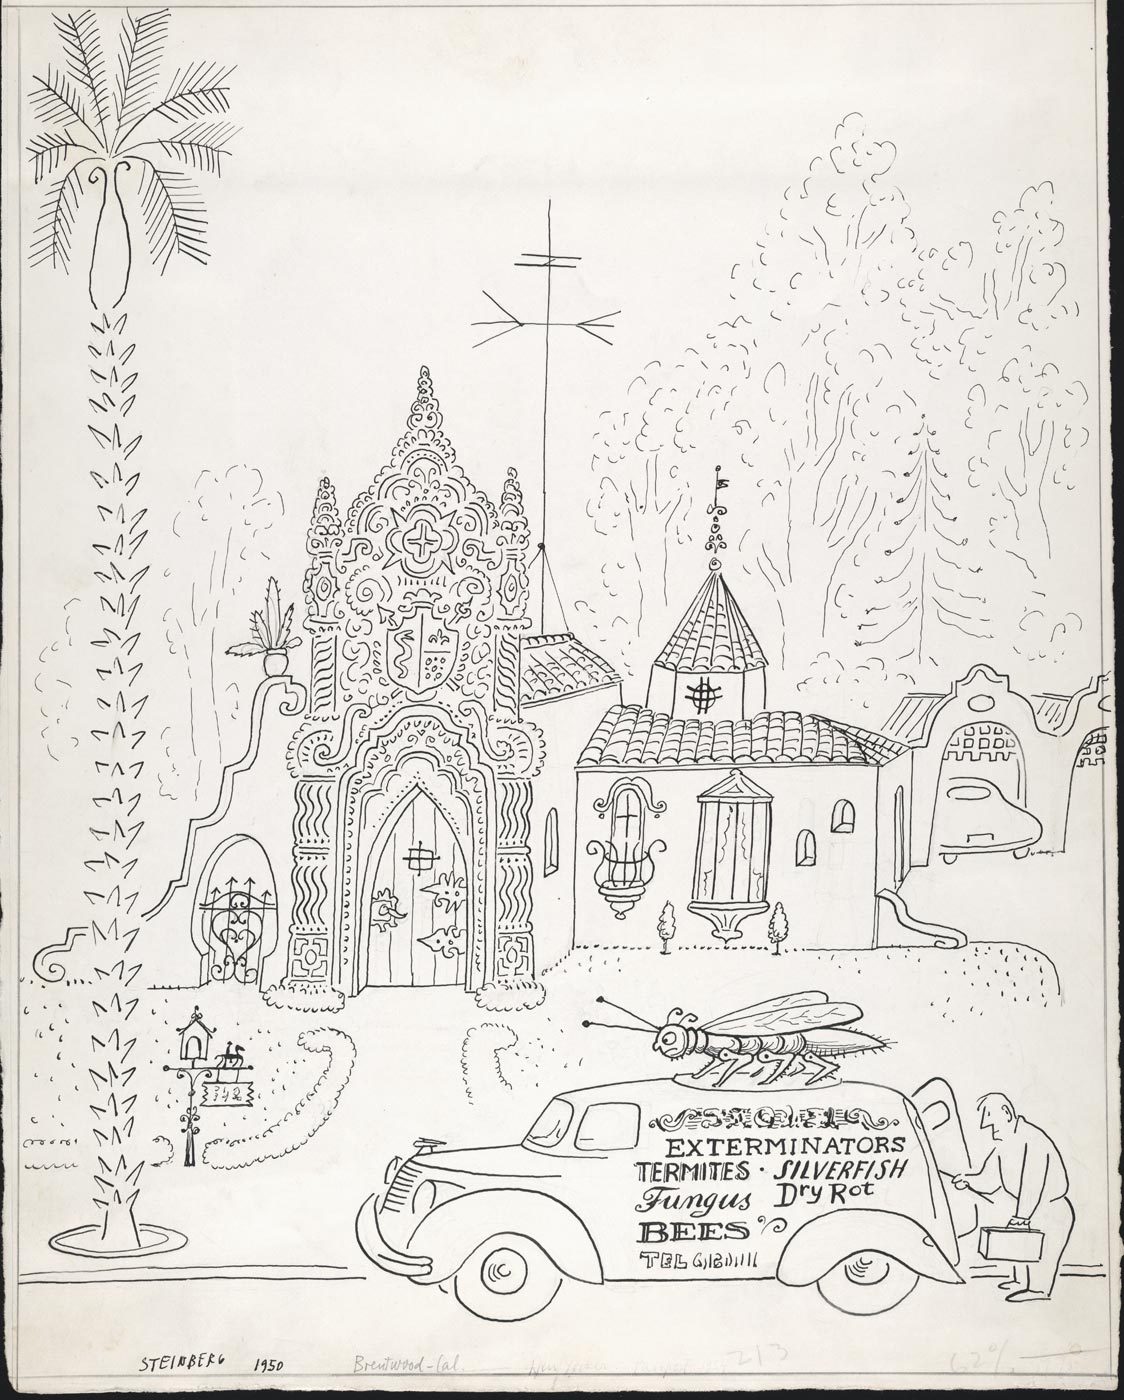 Original drawing for the portfolio “The Coast,” <em>The New Yorker</em>, January 27, 1951. <em>Exterminator No. 9</em>, 1950, ink on paper, 14 ½ x 11 ½ in. Saul Steinberg Papers, Beinecke Rare Book and Manuscript Library, Yale University.